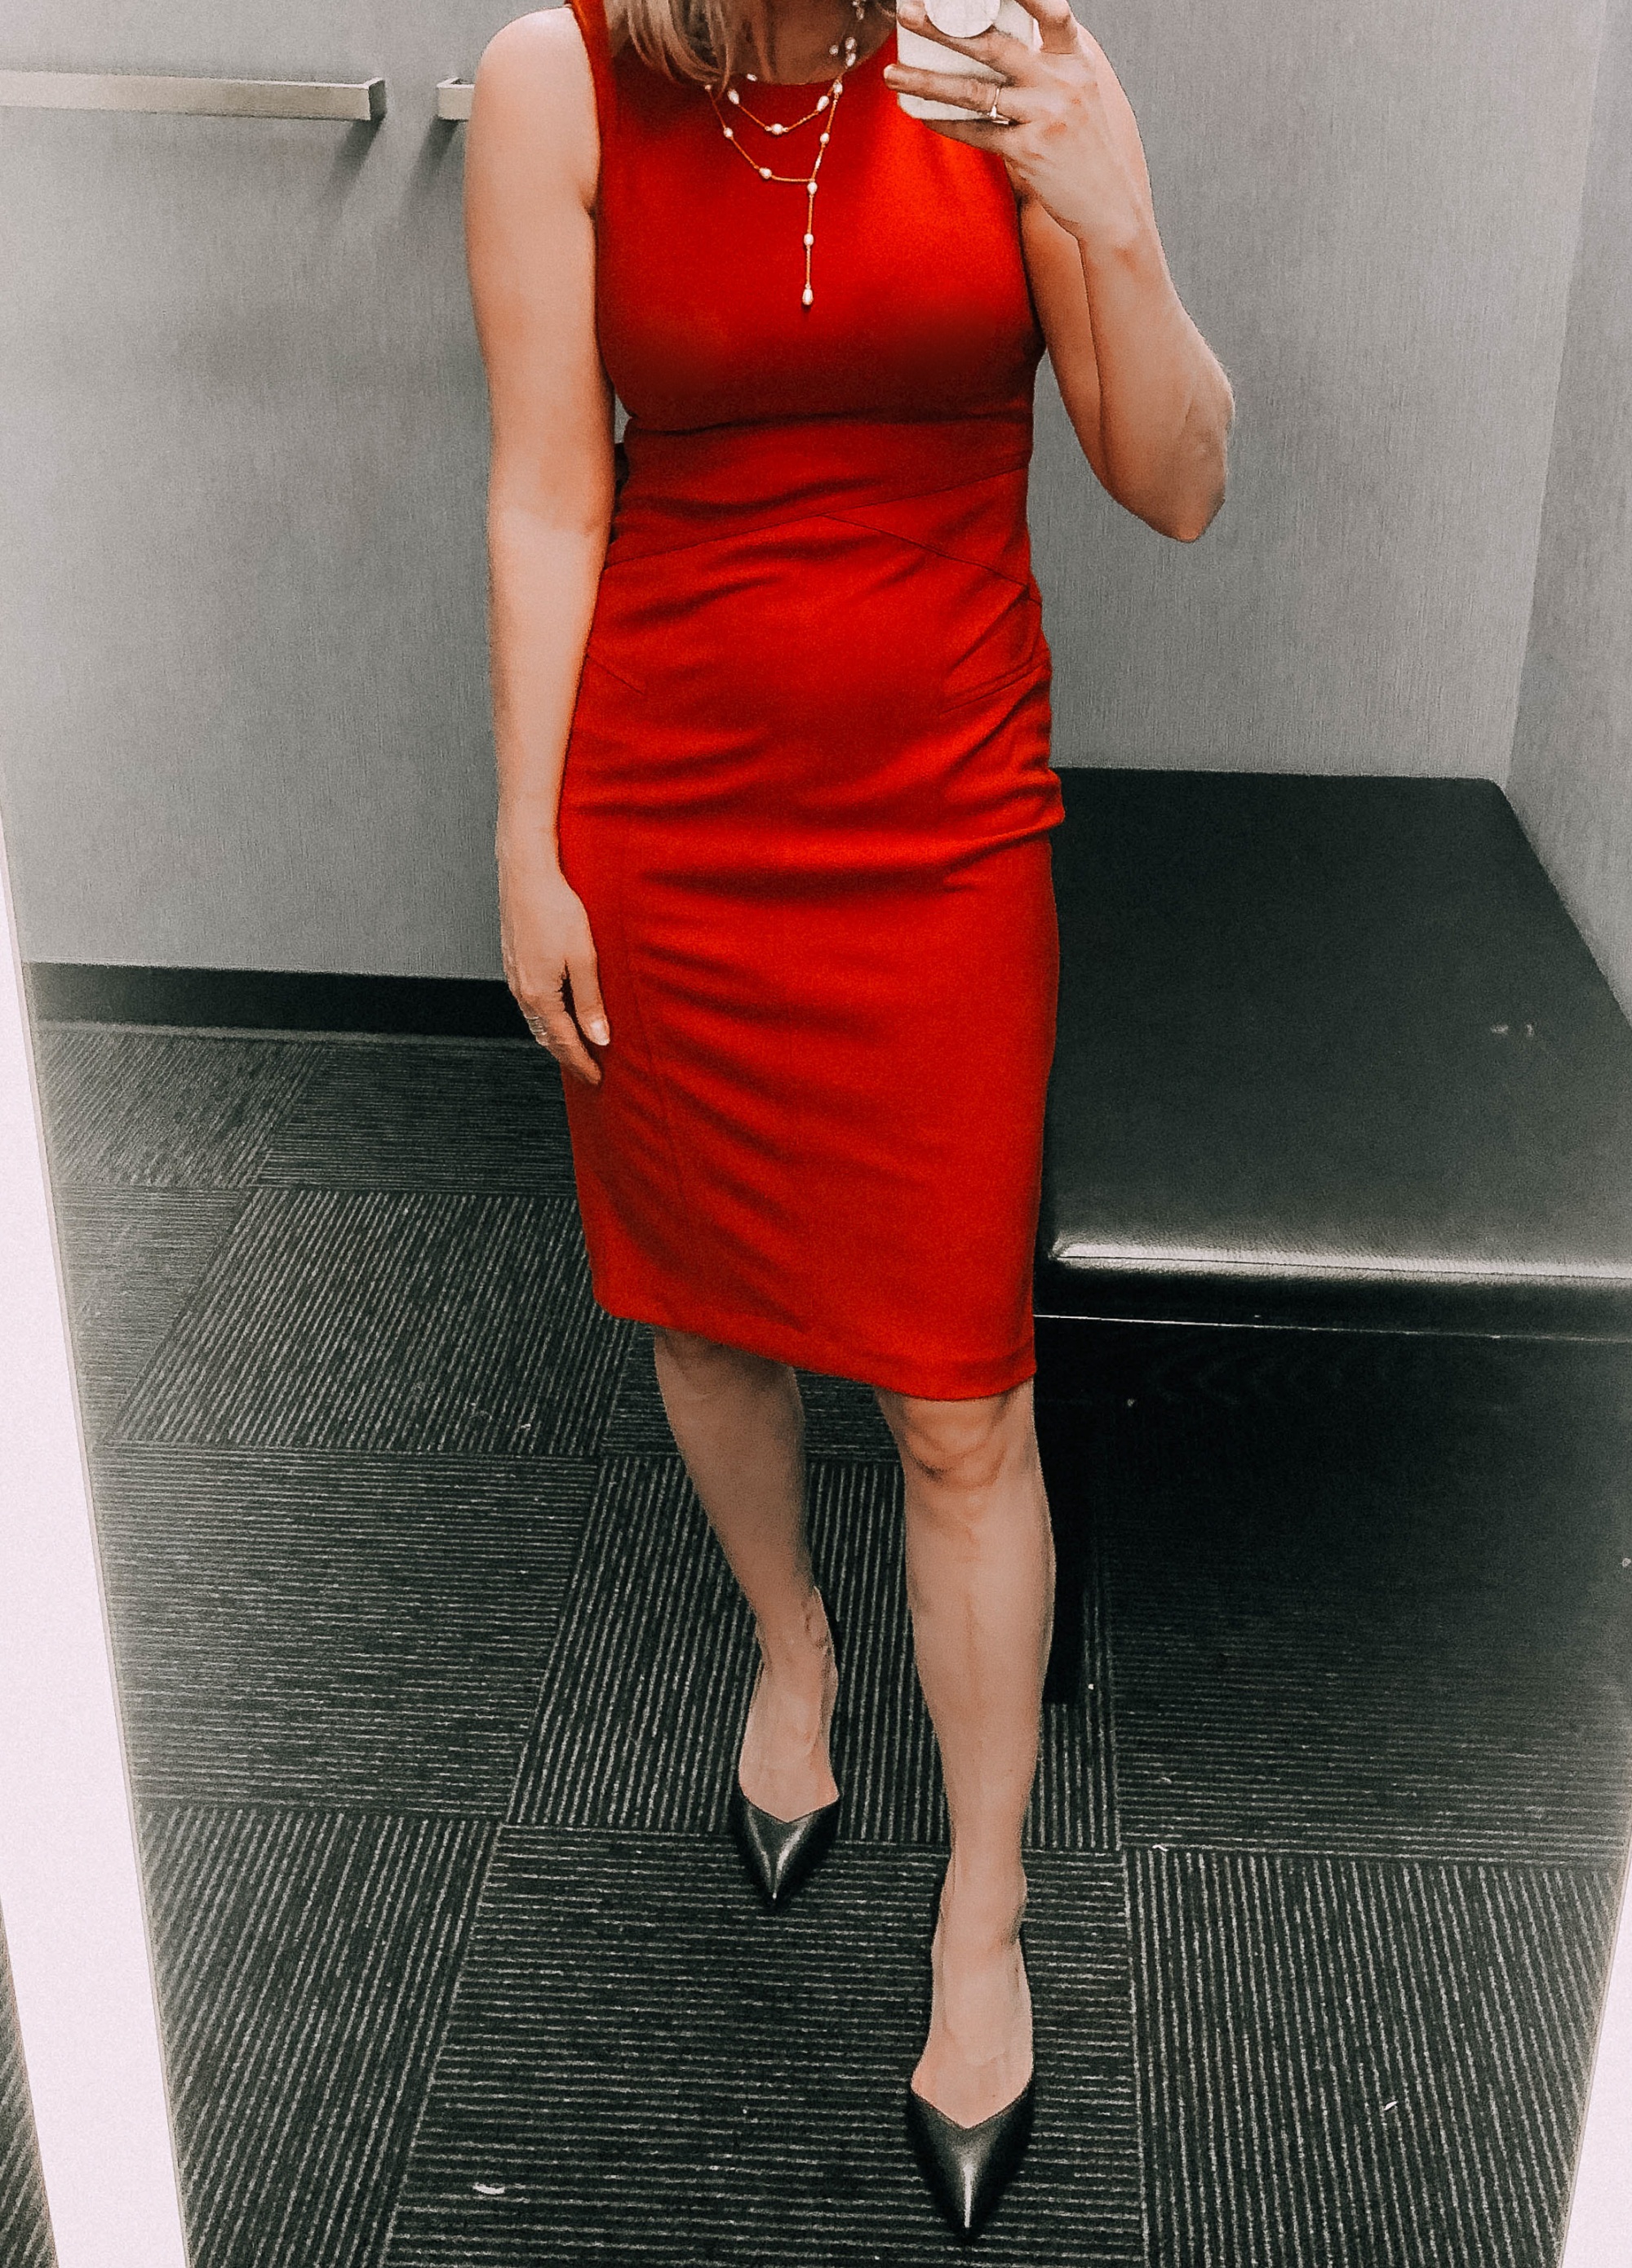 Nordstrom Sale Dresses, Fashion blogger Erin Busbee of BusbeeStyle.com featuring a red dress from the Nordstrom Anniversary Sale 2019